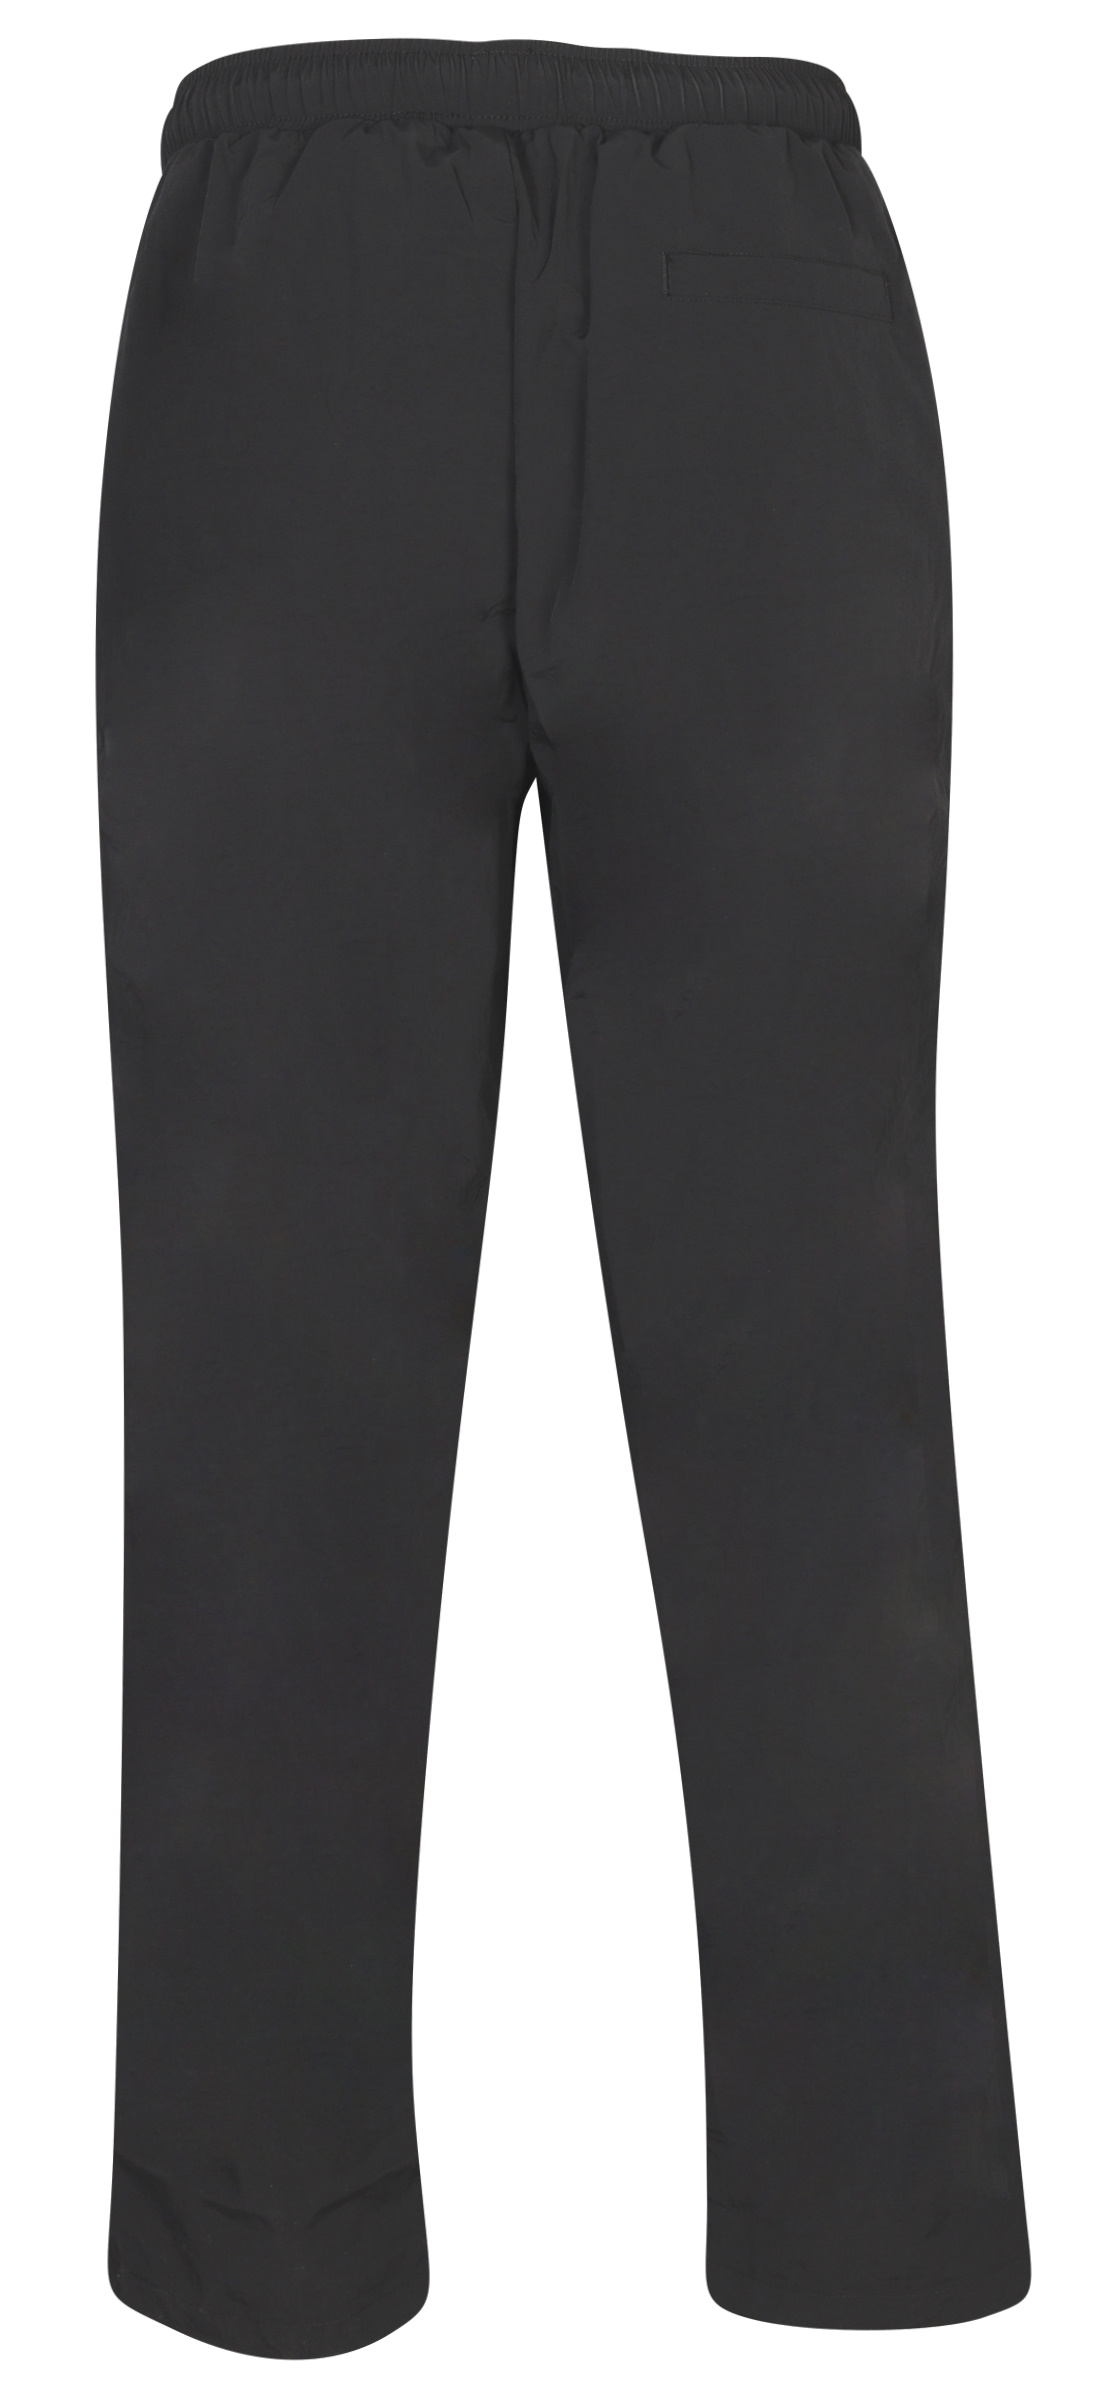 A-Cold-Wall Overlay Pant Black